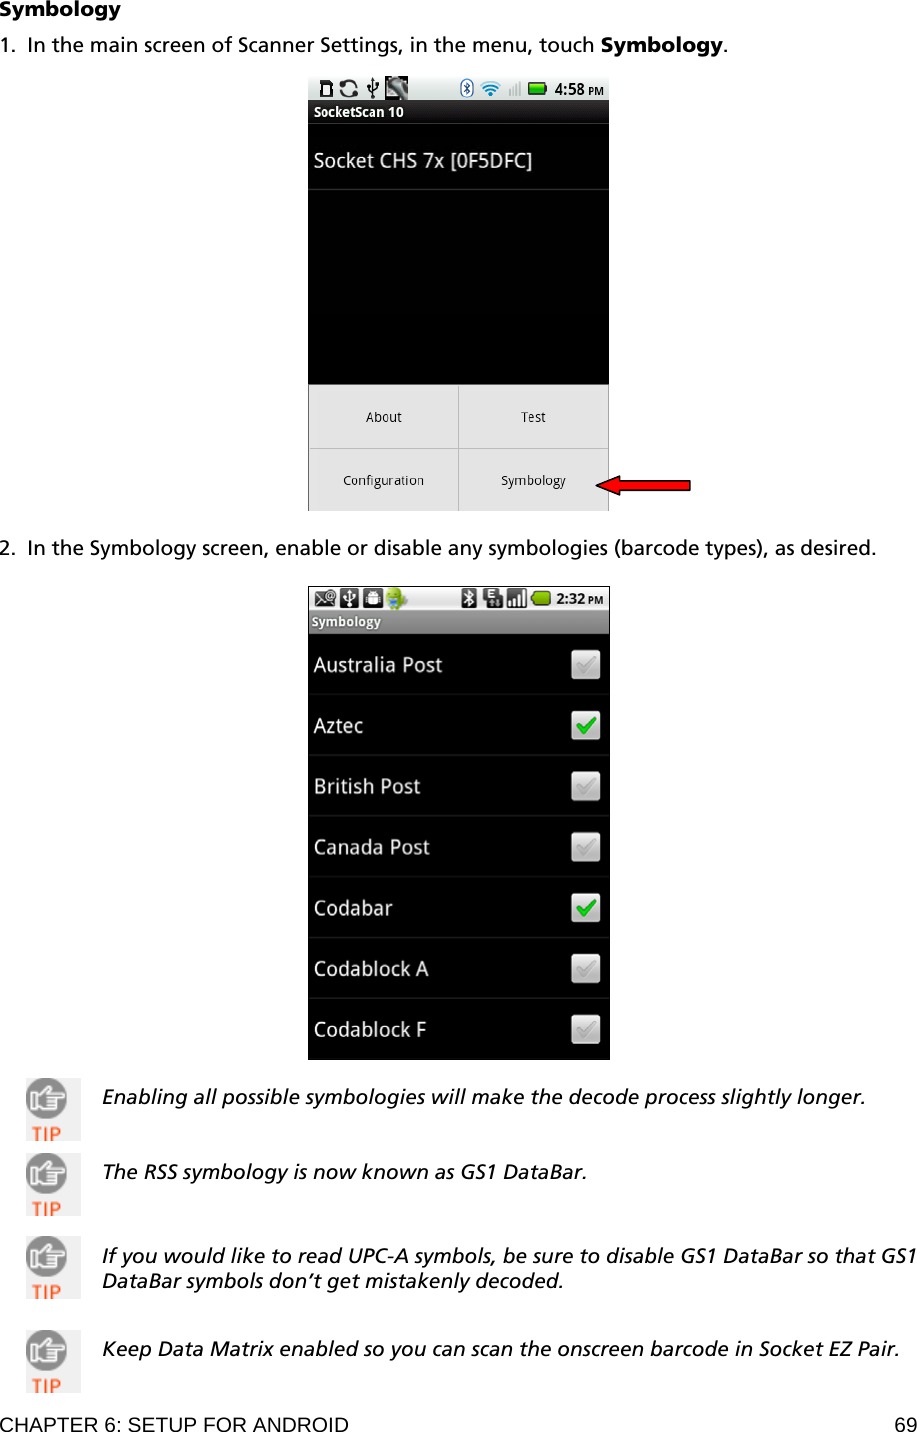 CHAPTER 6: SETUP FOR ANDROID  69 Symbology  1. In the main screen of Scanner Settings, in the menu, touch Symbology.       2. In the Symbology screen, enable or disable any symbologies (barcode types), as desired.    Enabling all possible symbologies will make the decode process slightly longer.   The RSS symbology is now known as GS1 DataBar.    If you would like to read UPC-A symbols, be sure to disable GS1 DataBar so that GS1 DataBar symbols don’t get mistakenly decoded.    Keep Data Matrix enabled so you can scan the onscreen barcode in Socket EZ Pair.  